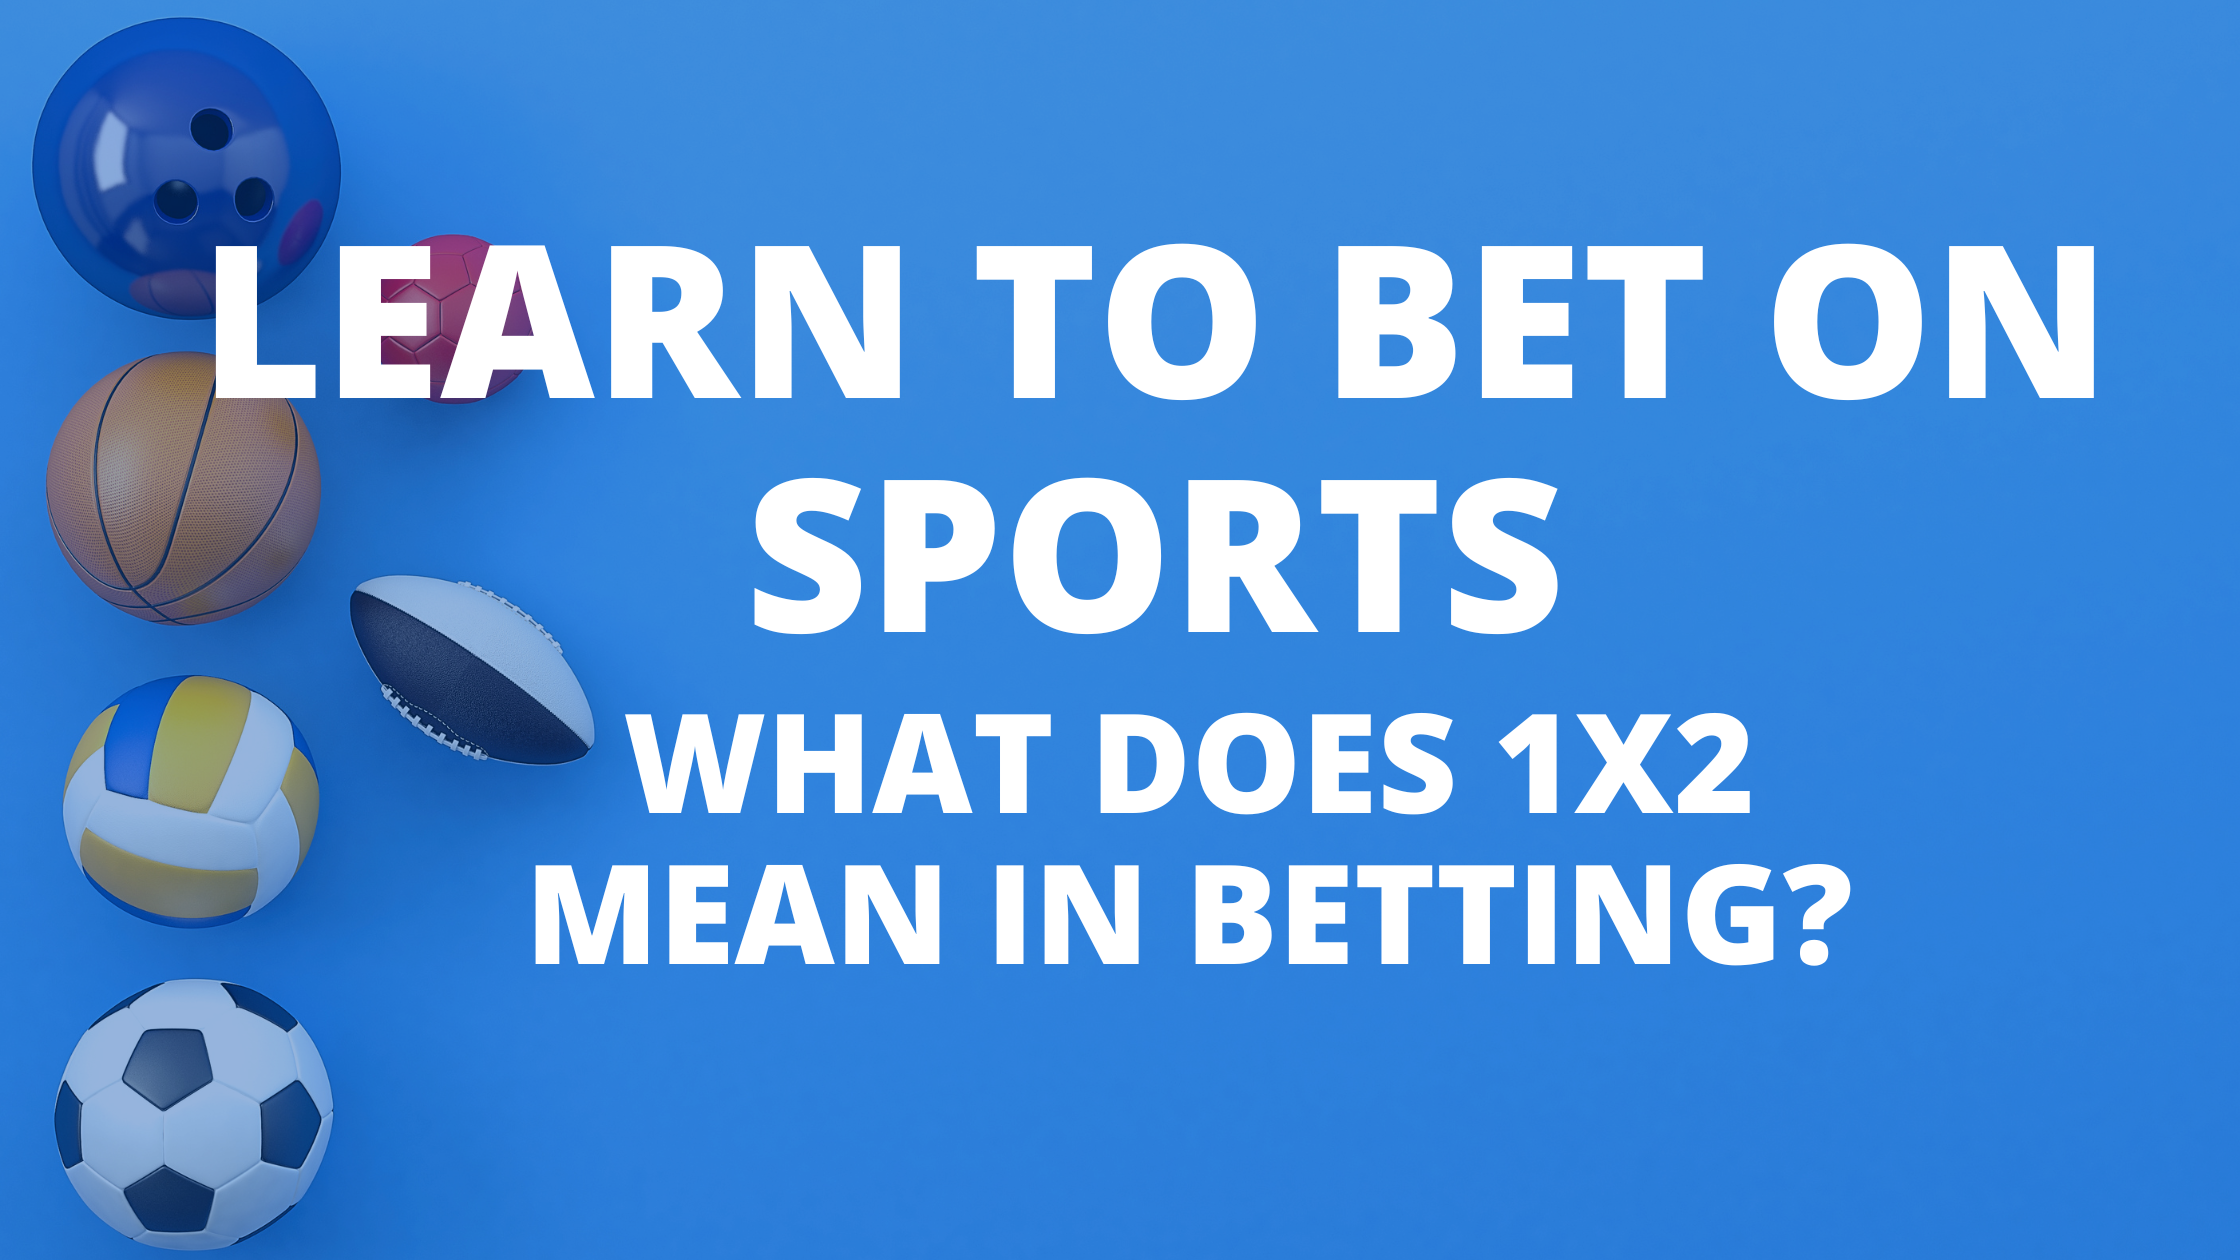 What does 1x2 Mean in Betting?